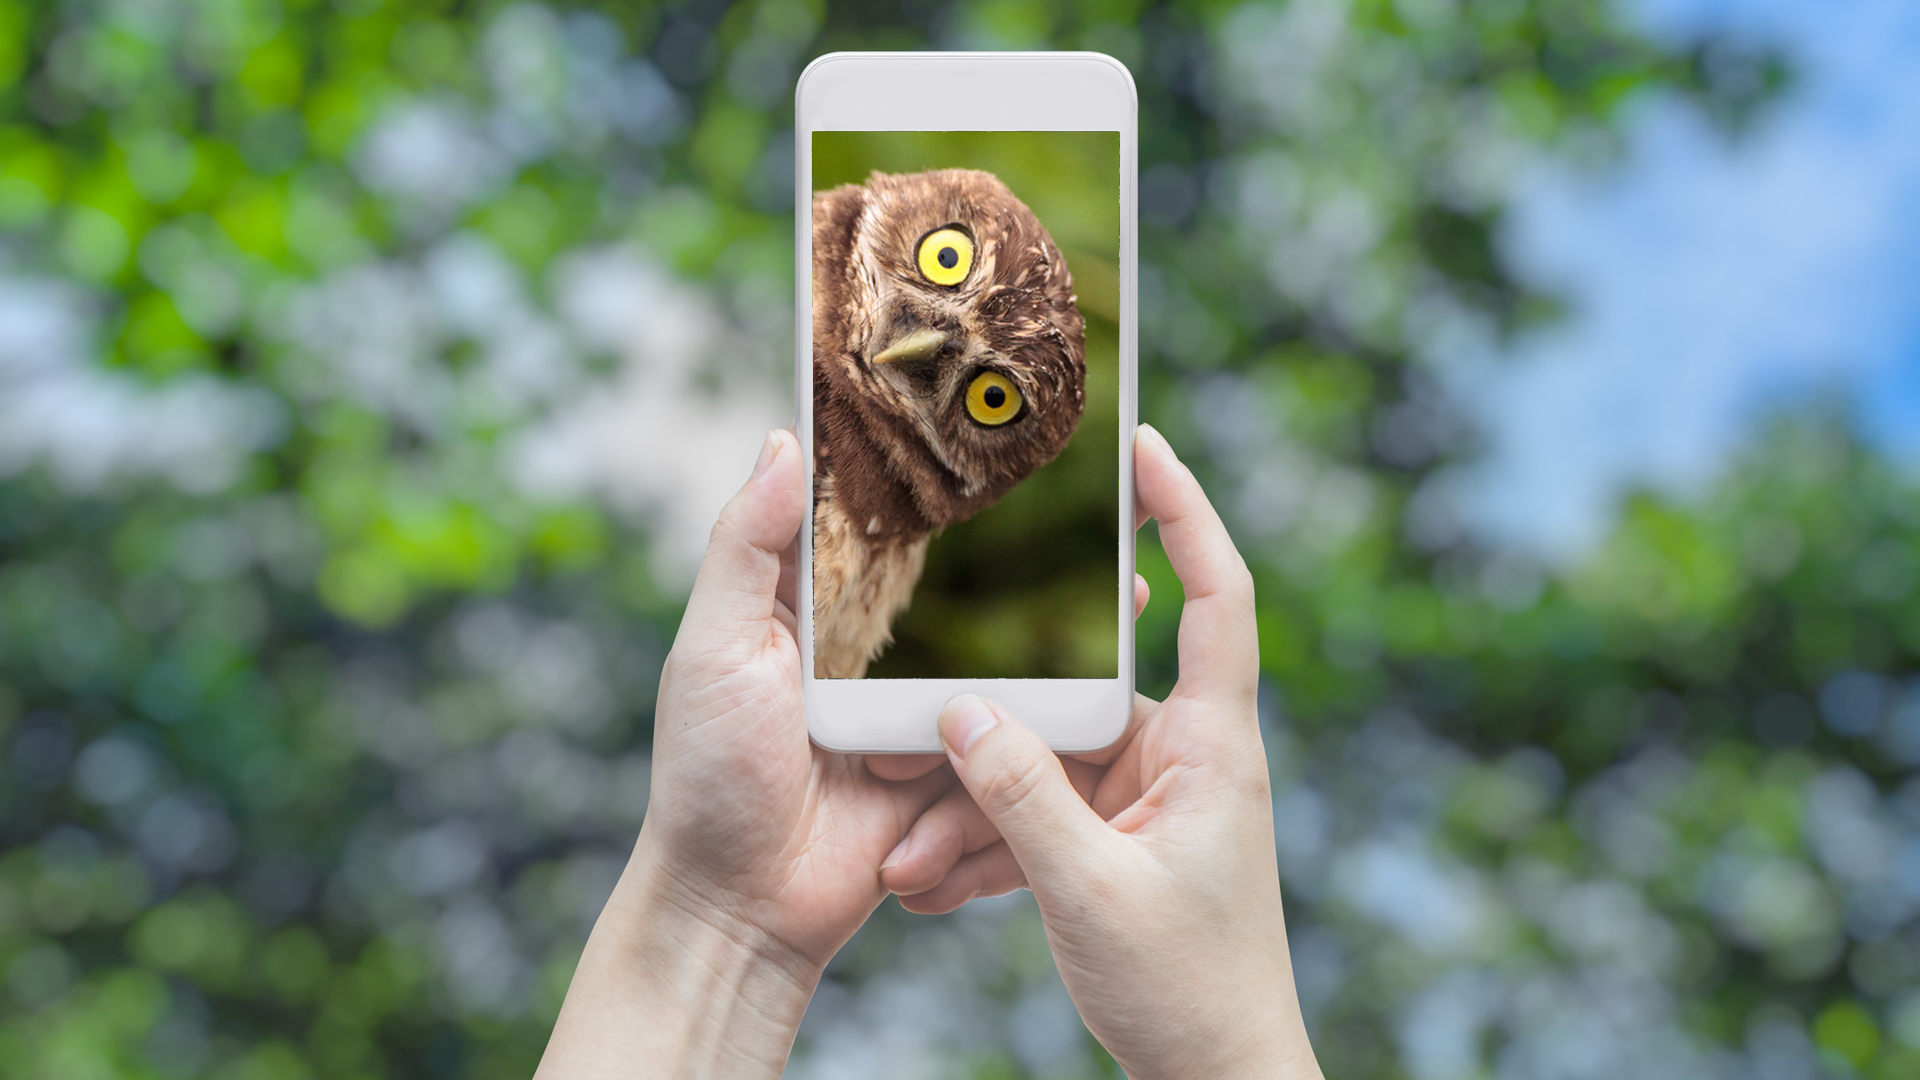 A phone used to take a photo of a curious owl